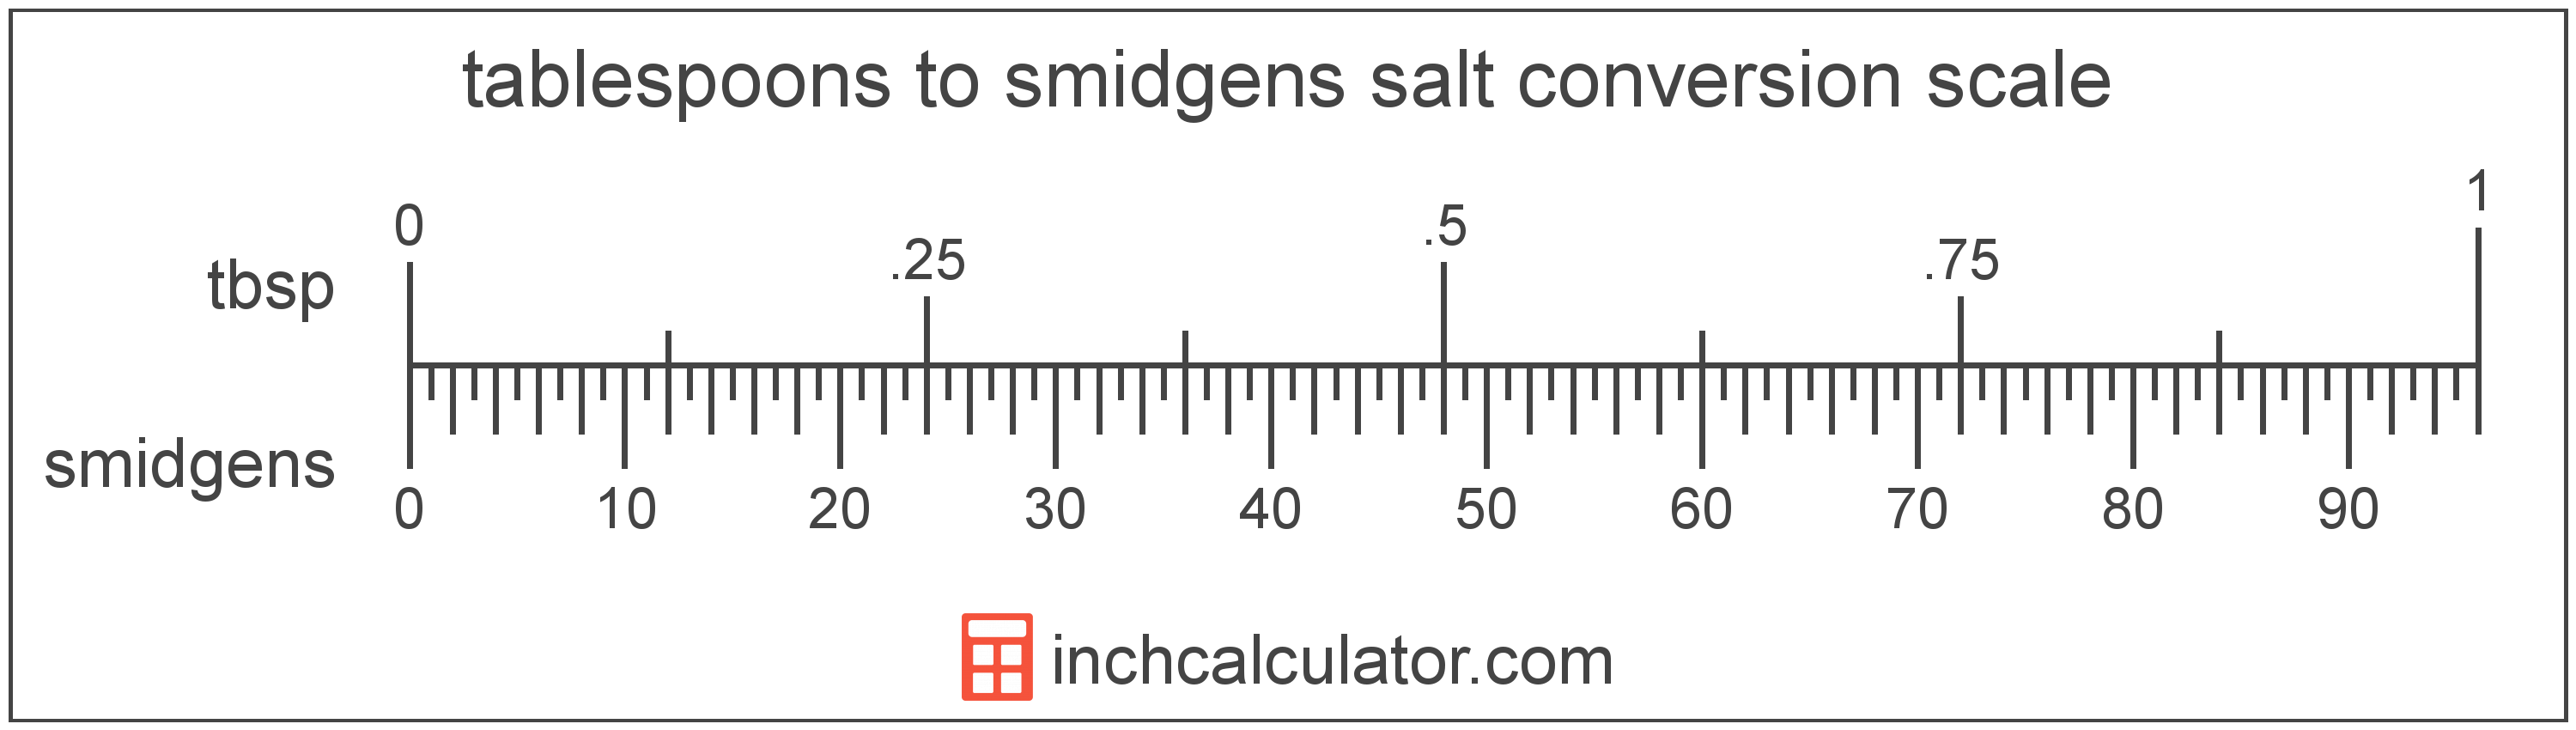 conversion scale showing smidgens and equivalent tablespoons salt volume values